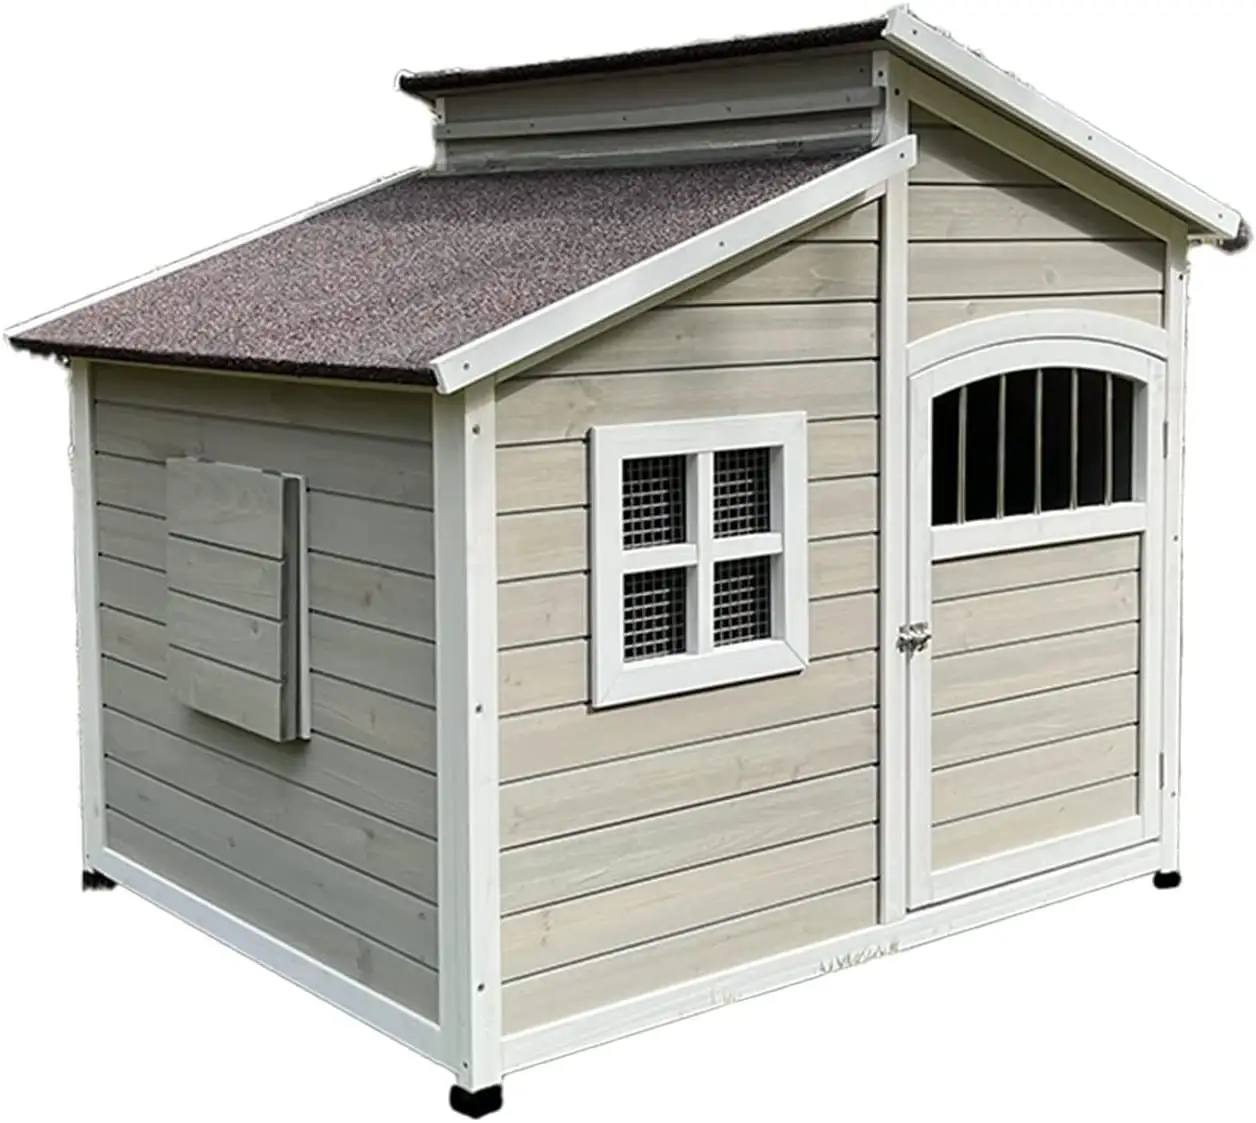 Wooden Large Dog Pet House for Outdoor or Indoor